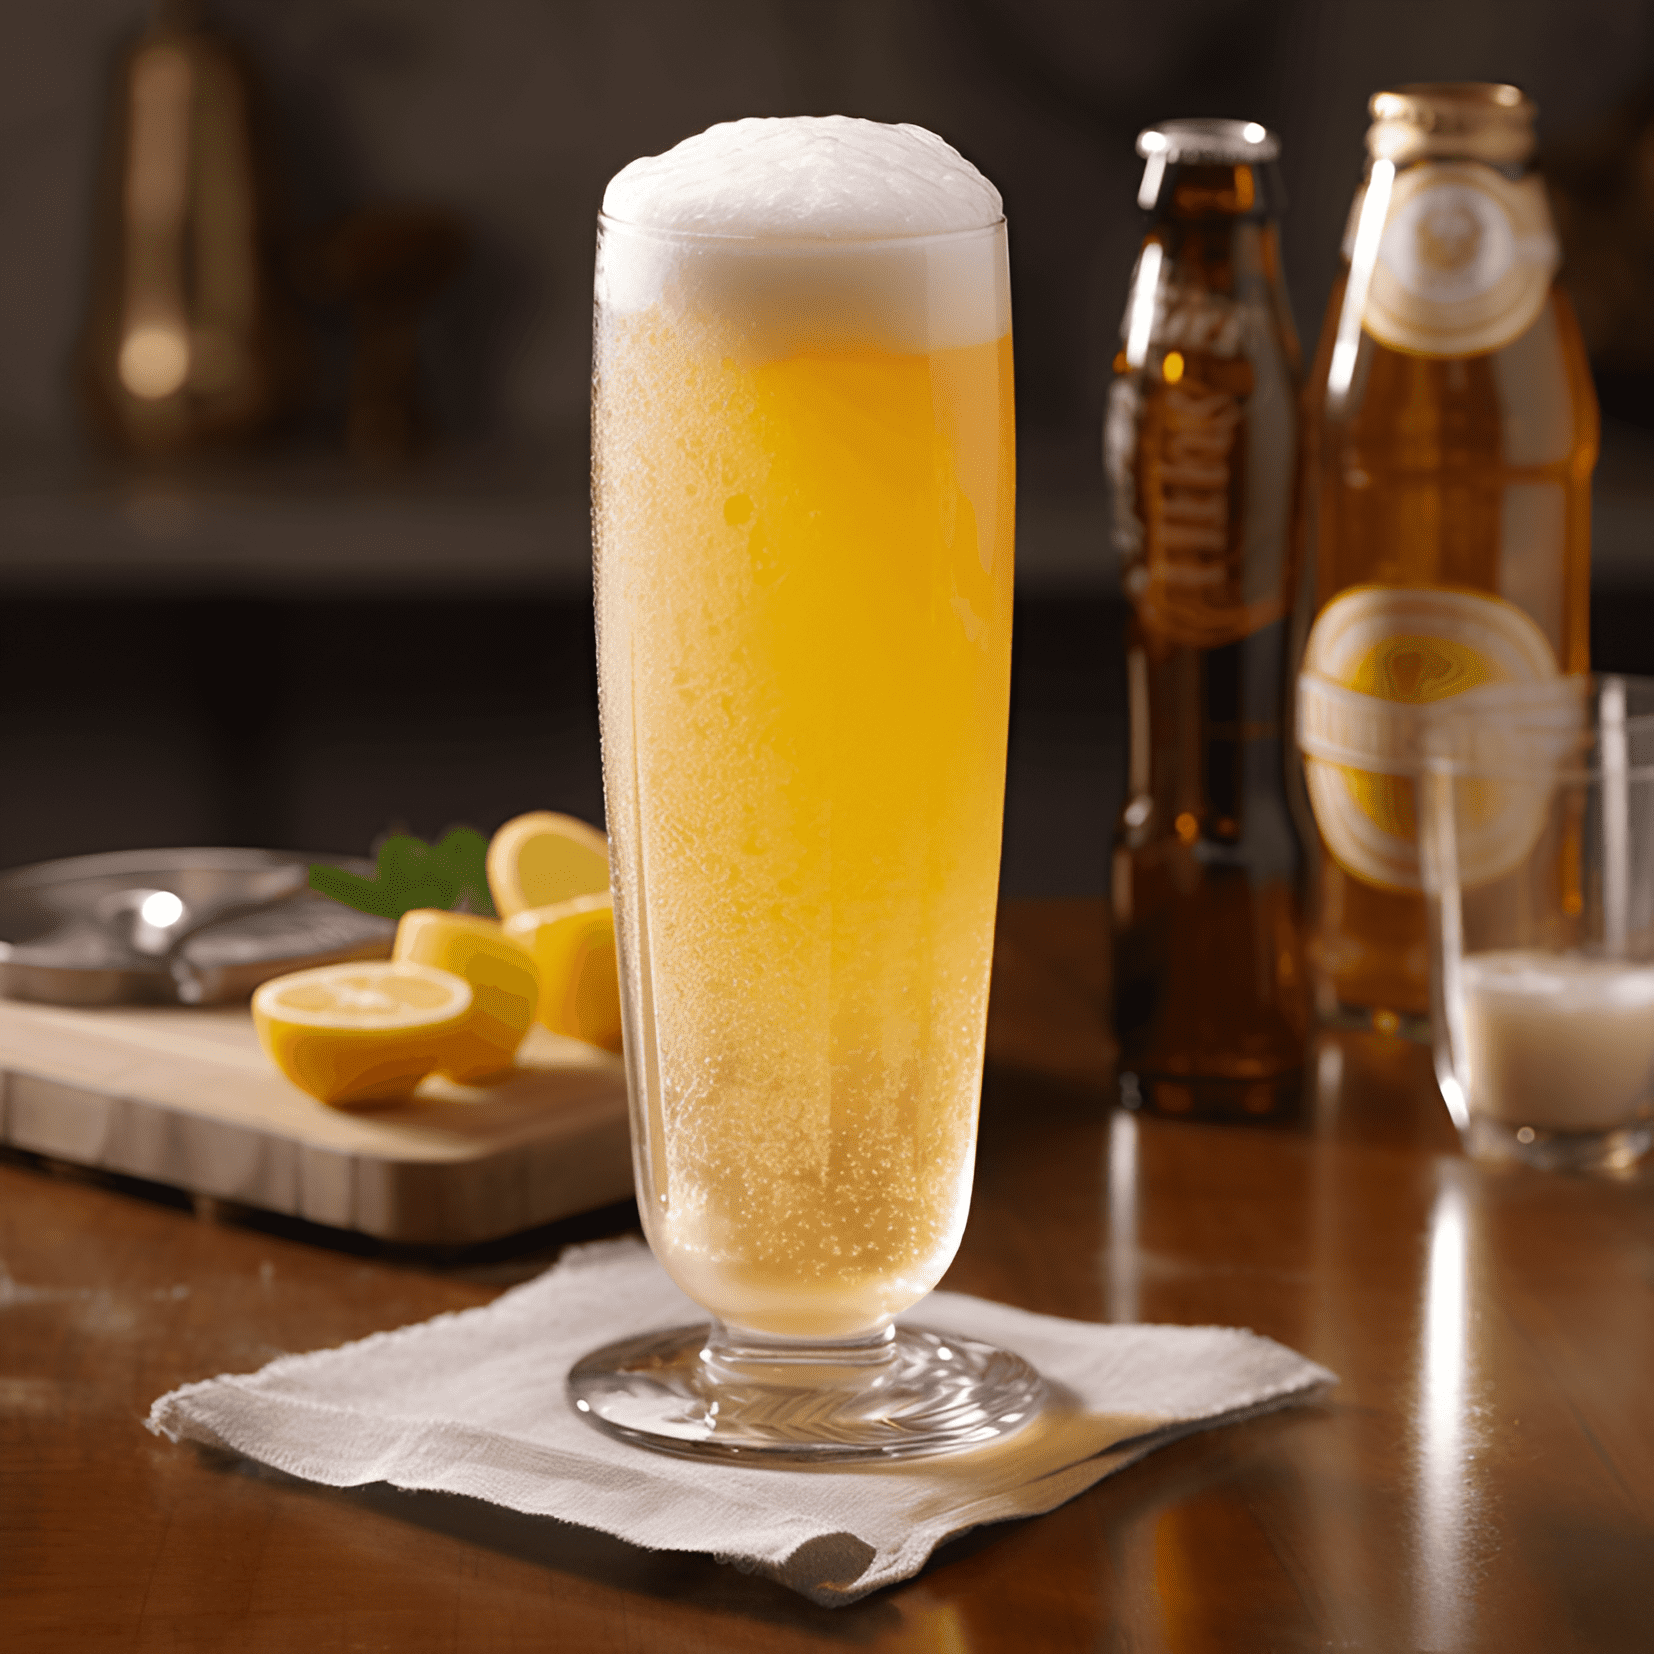 The Shandy cocktail is a perfect balance of sweet, tangy, and refreshing flavors. The lemonade adds a bright citrusy note, while the beer provides a malty, slightly bitter backbone. The overall taste is light, crisp, and effervescent.